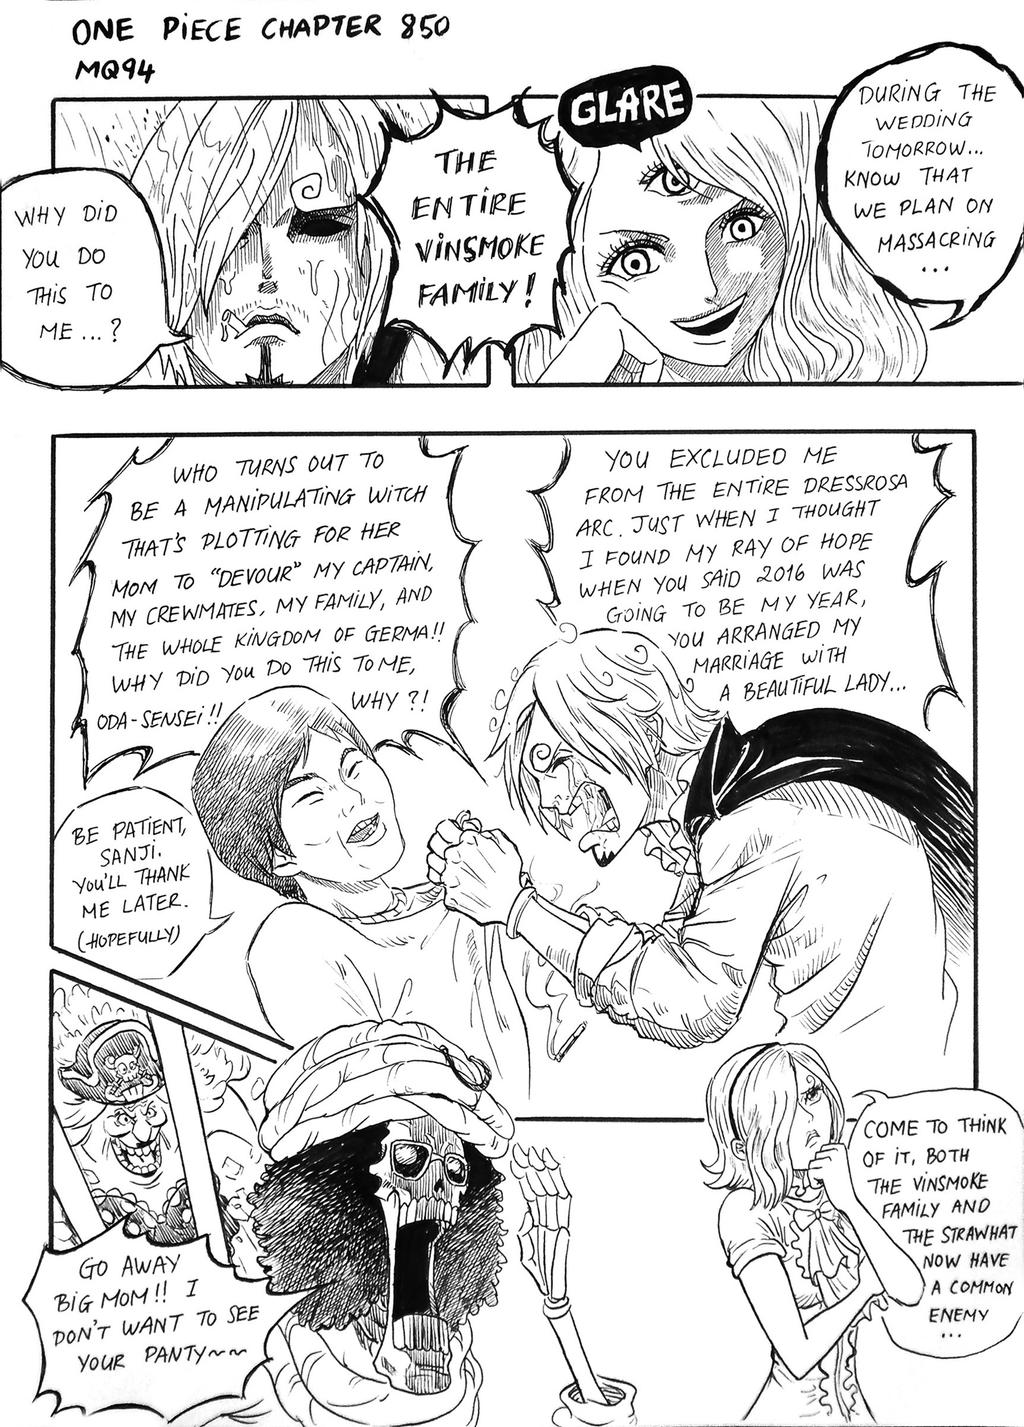 One Piece Chapter 850 Don T Give Up Sanji By Minhquach94 On Deviantart